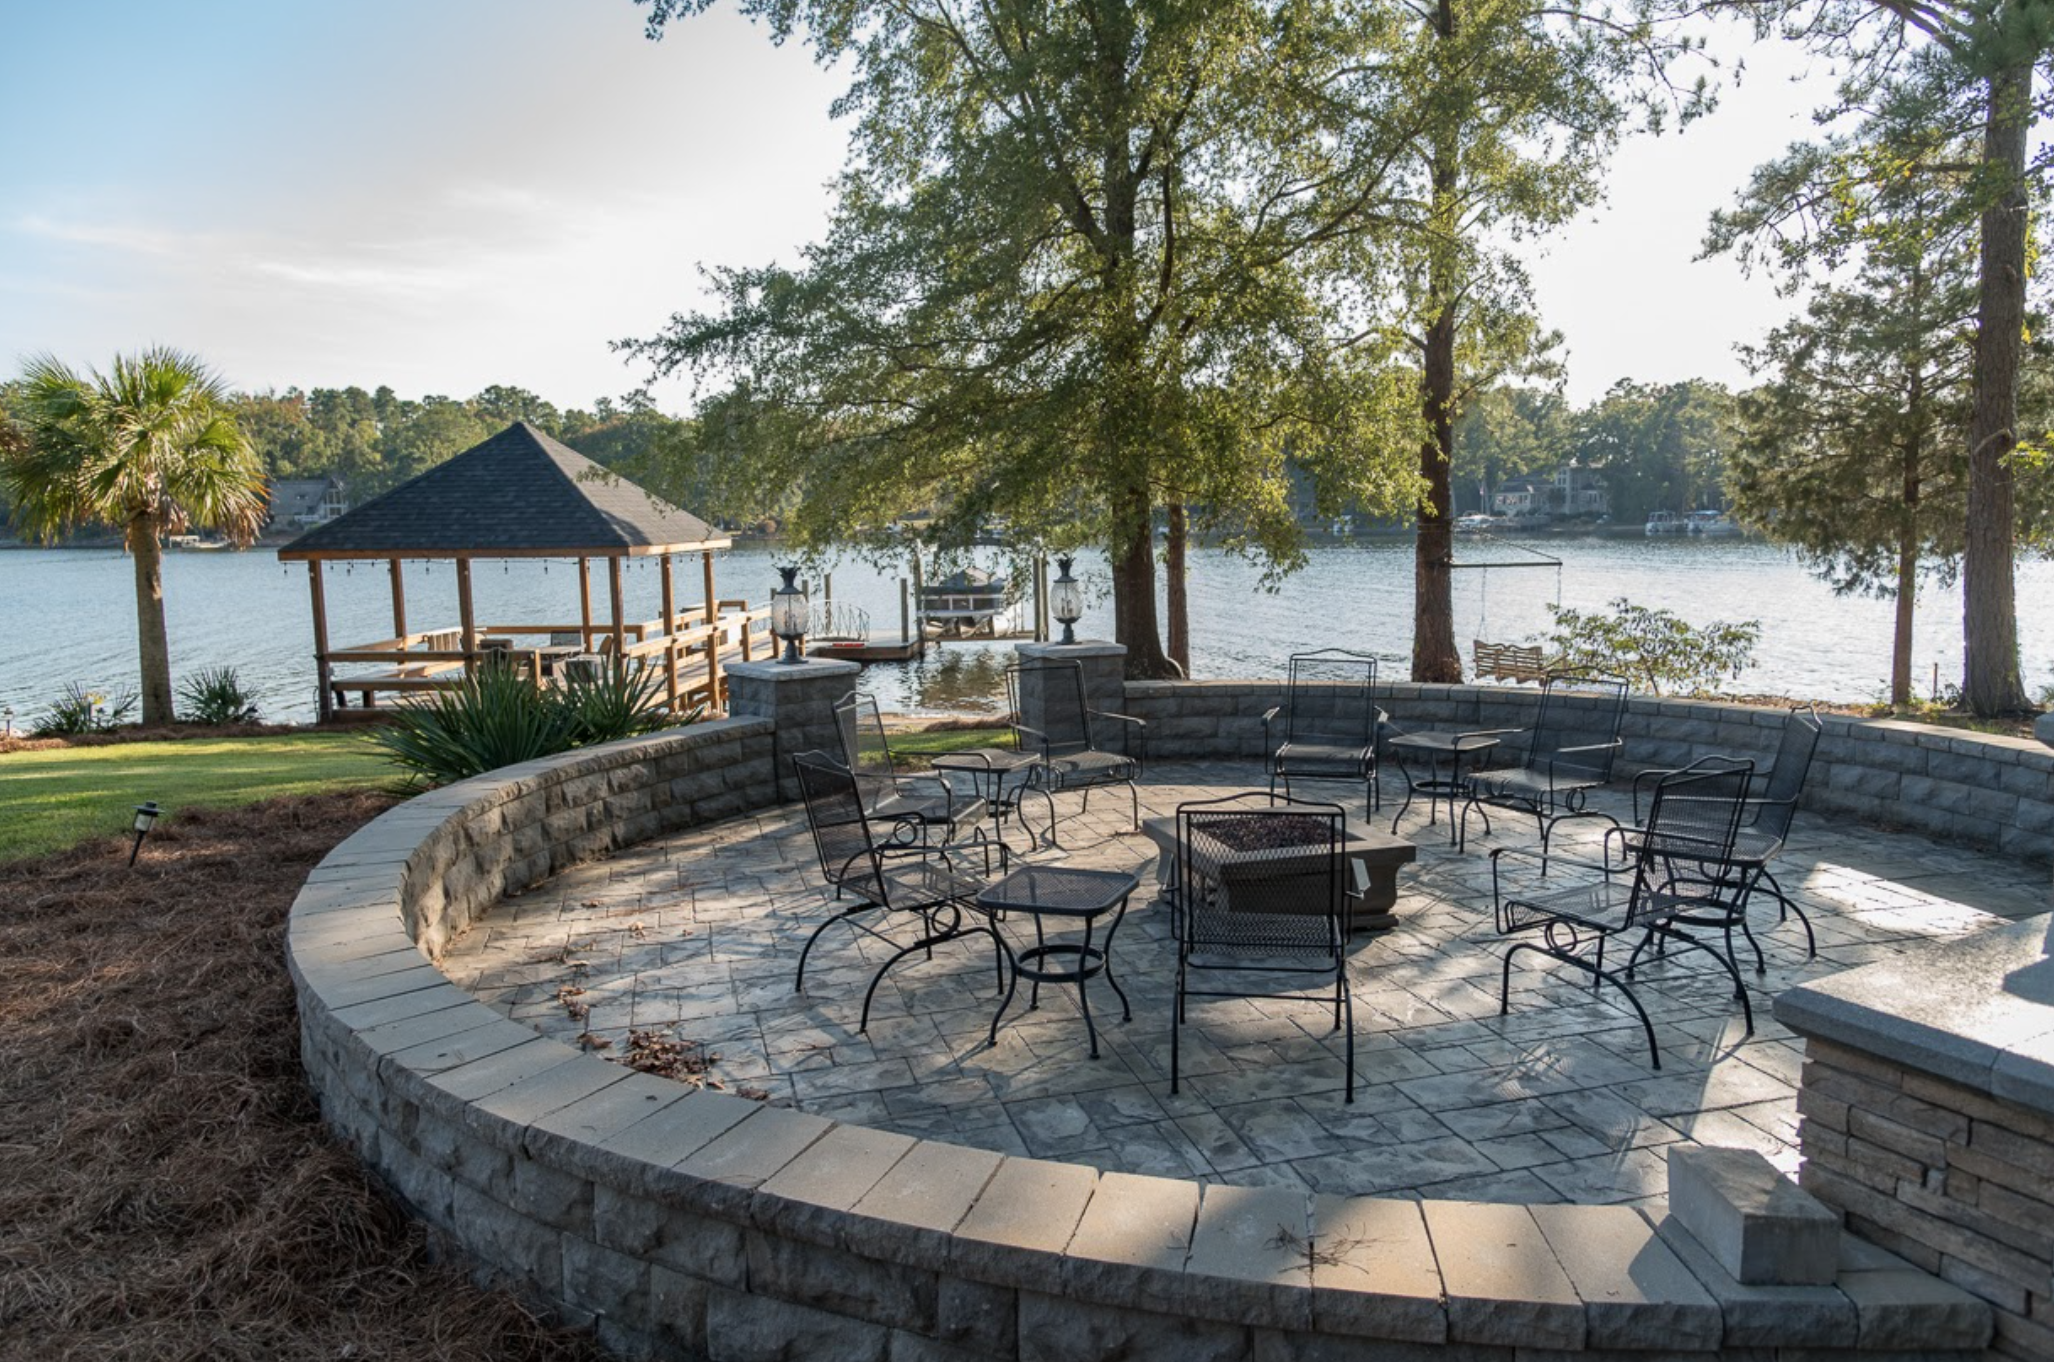 Patio with chairs and fire-pit overlooking Lake Murray with covered dock in the background